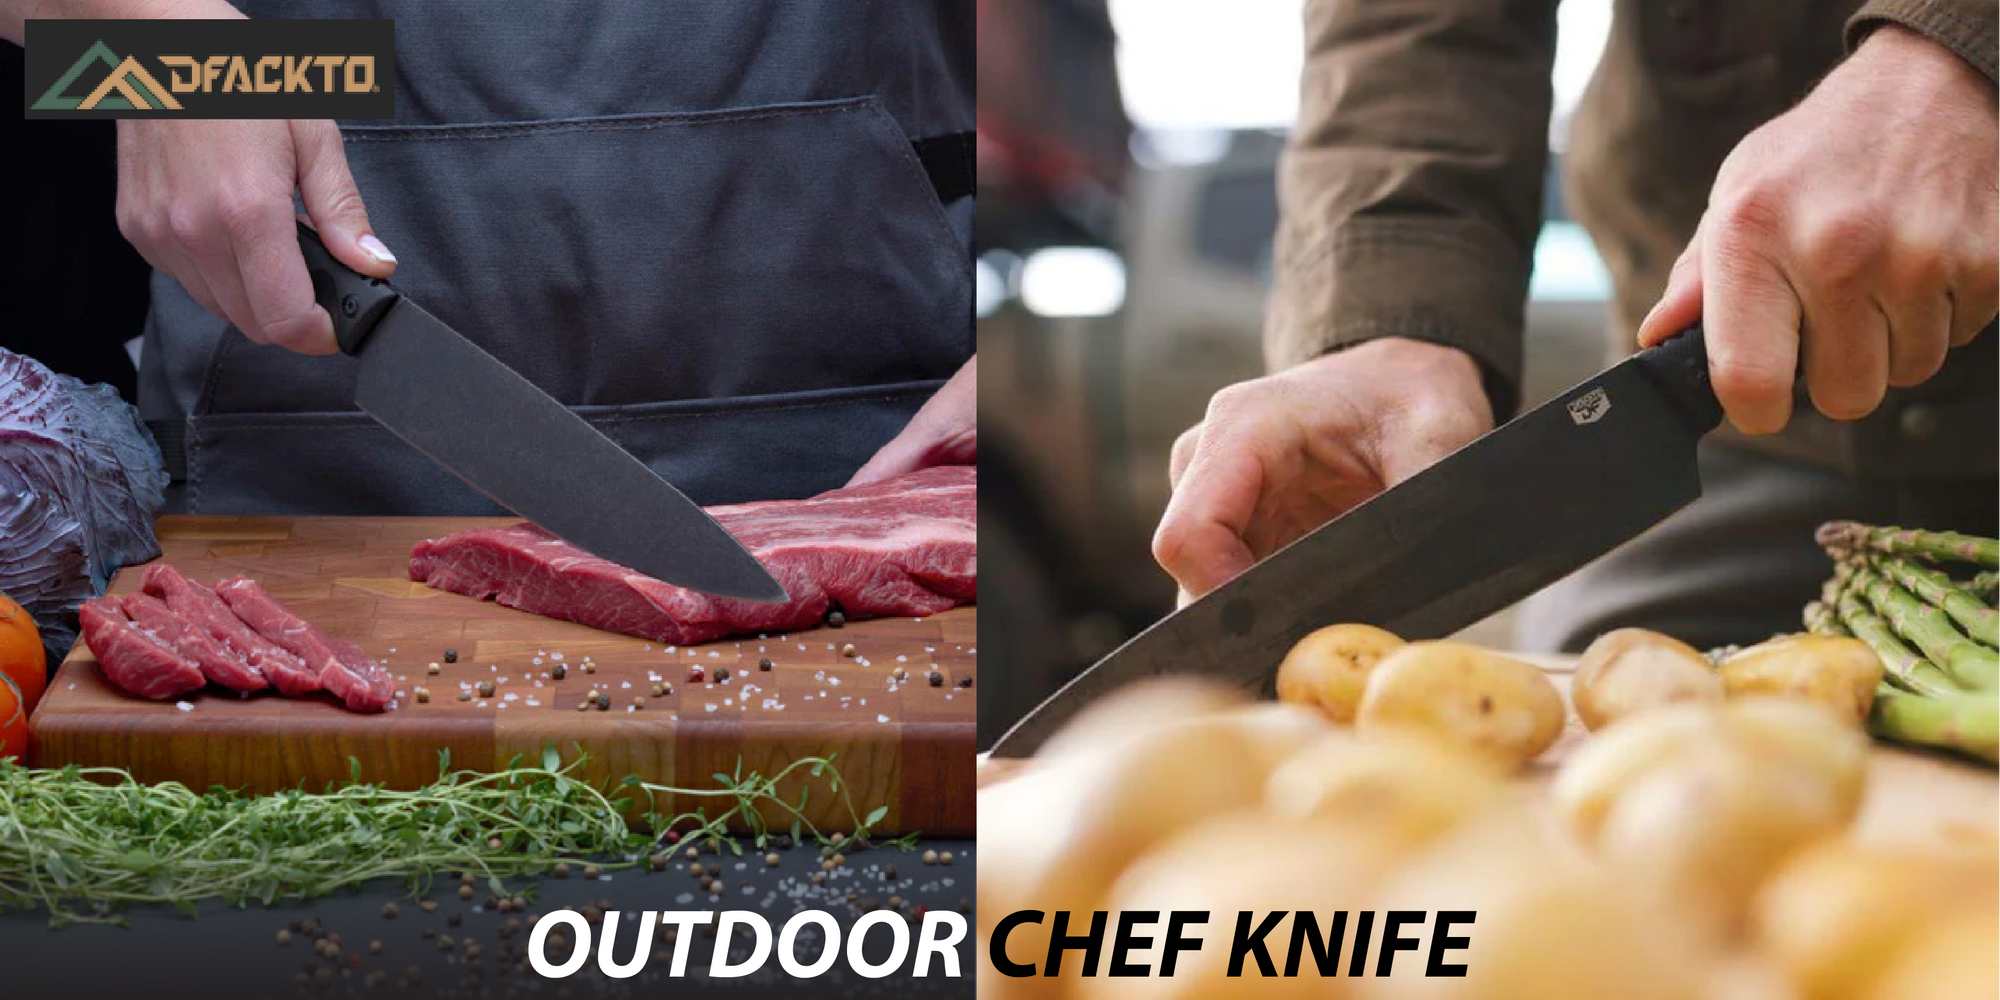 What Are The 5 Mistakes To Avoid While Using A Kitchen Knife?